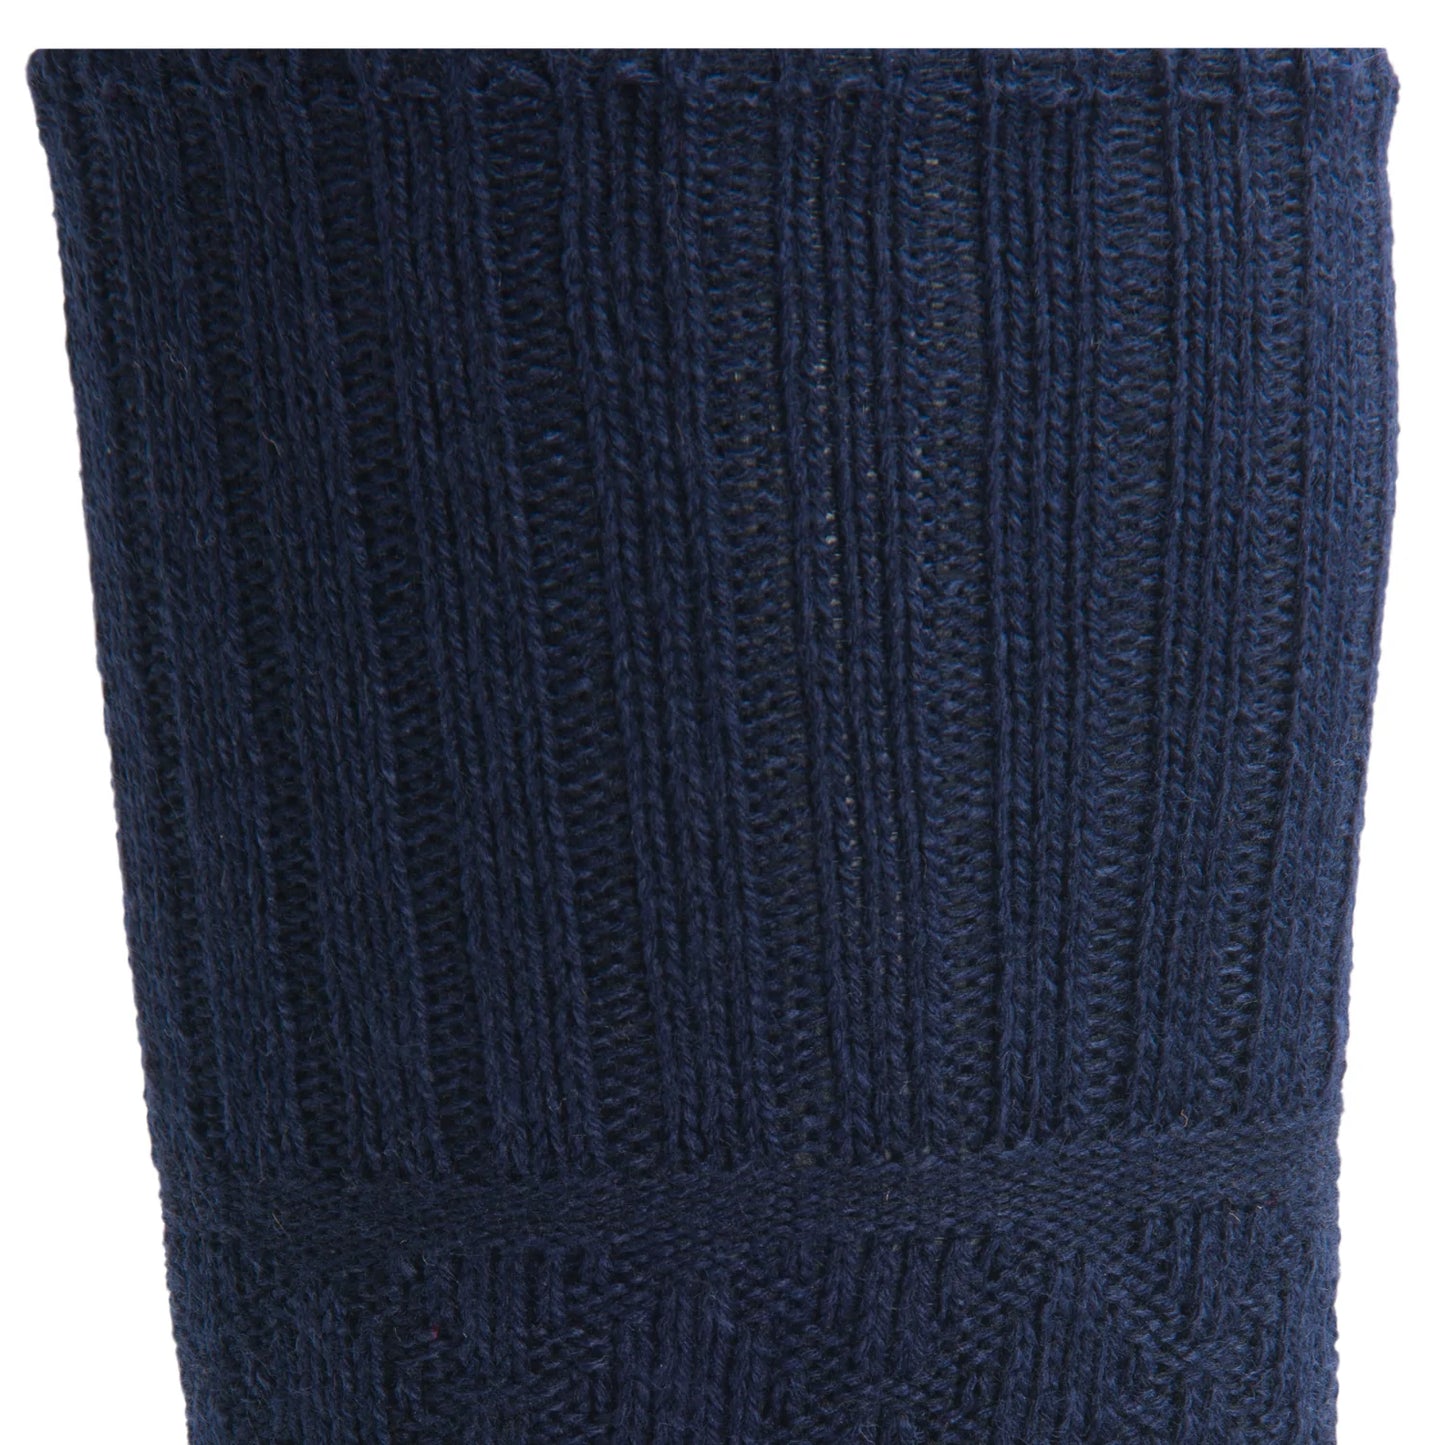 Navy II cuff perspective